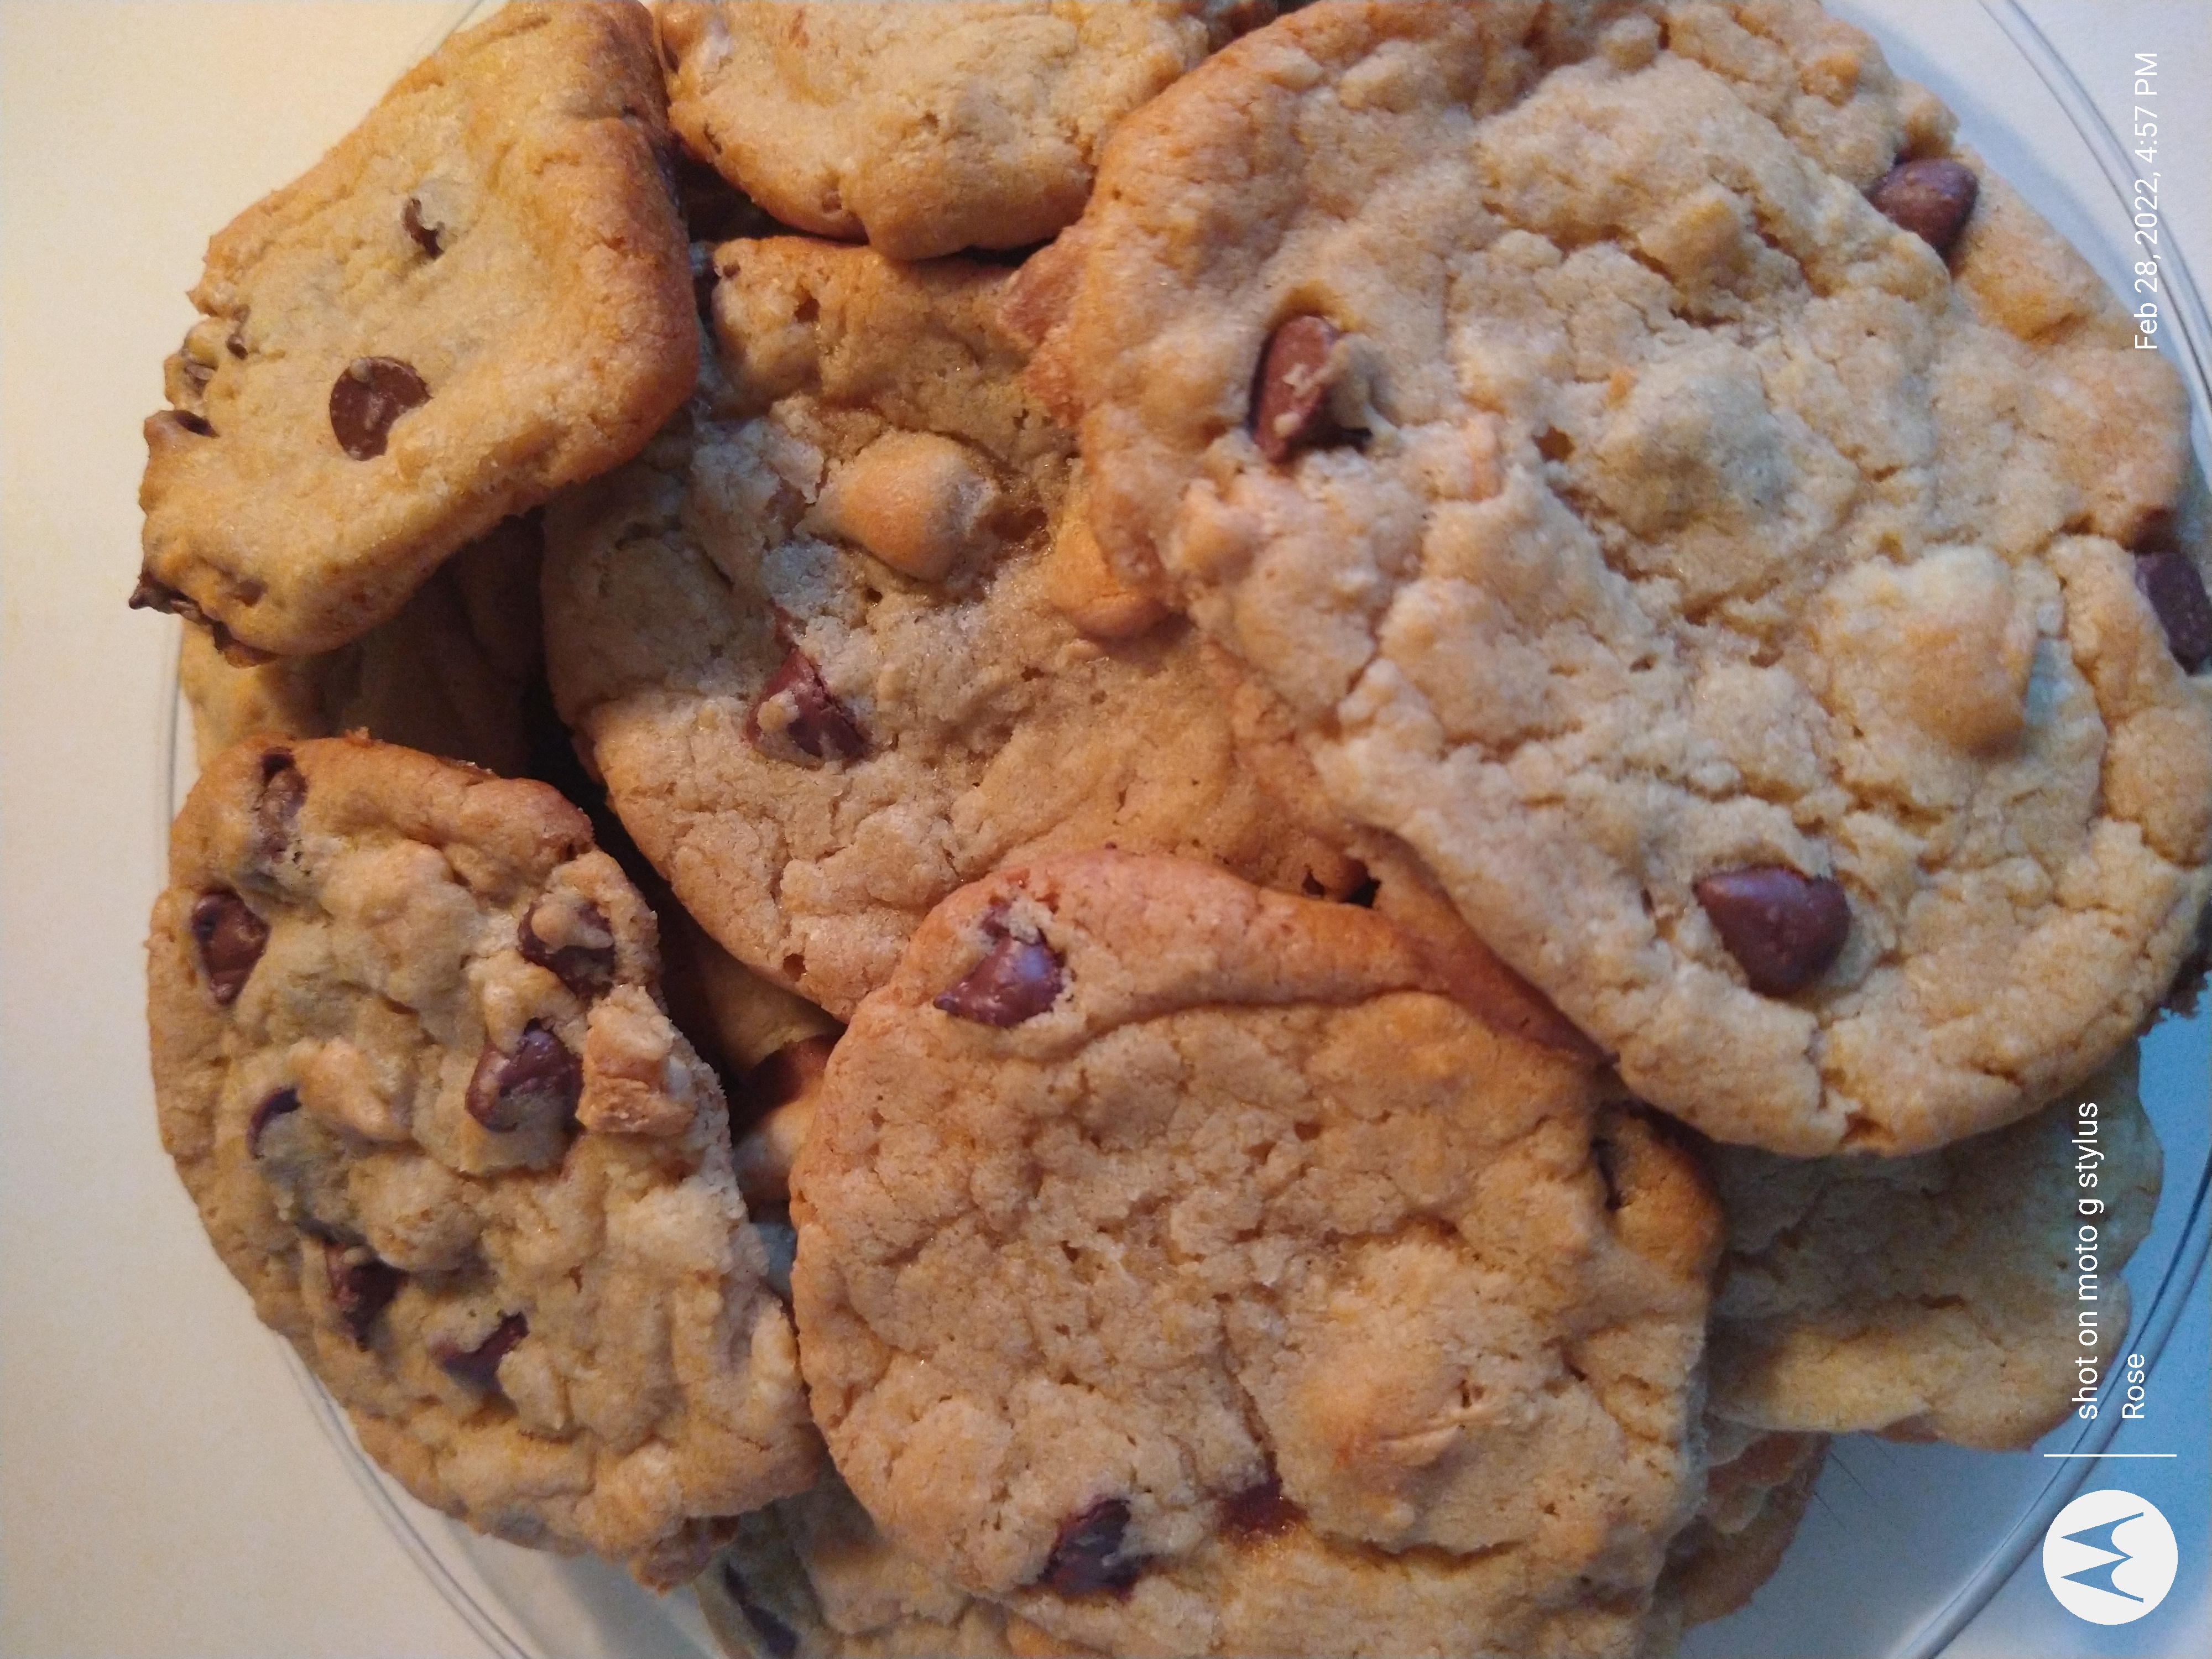 Absolutely the Best Chocolate Chip Cookies RoseMarie Gonzalez